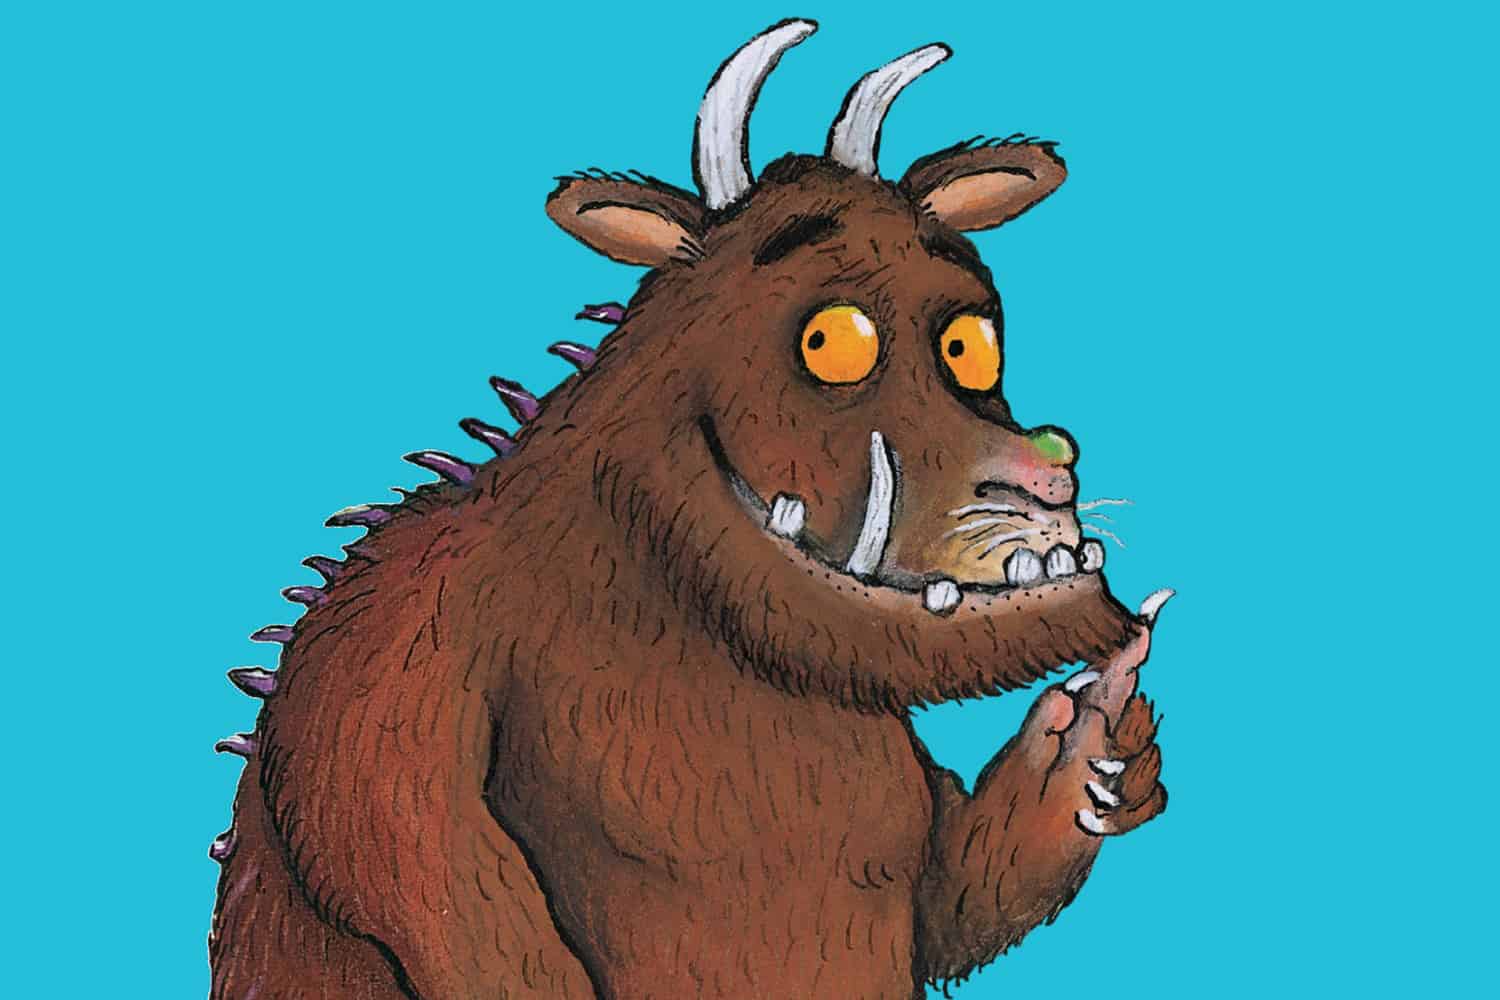 The Gruffalo, live on stage at Ipswich Civic Centre on Tuesday 30 October 2018